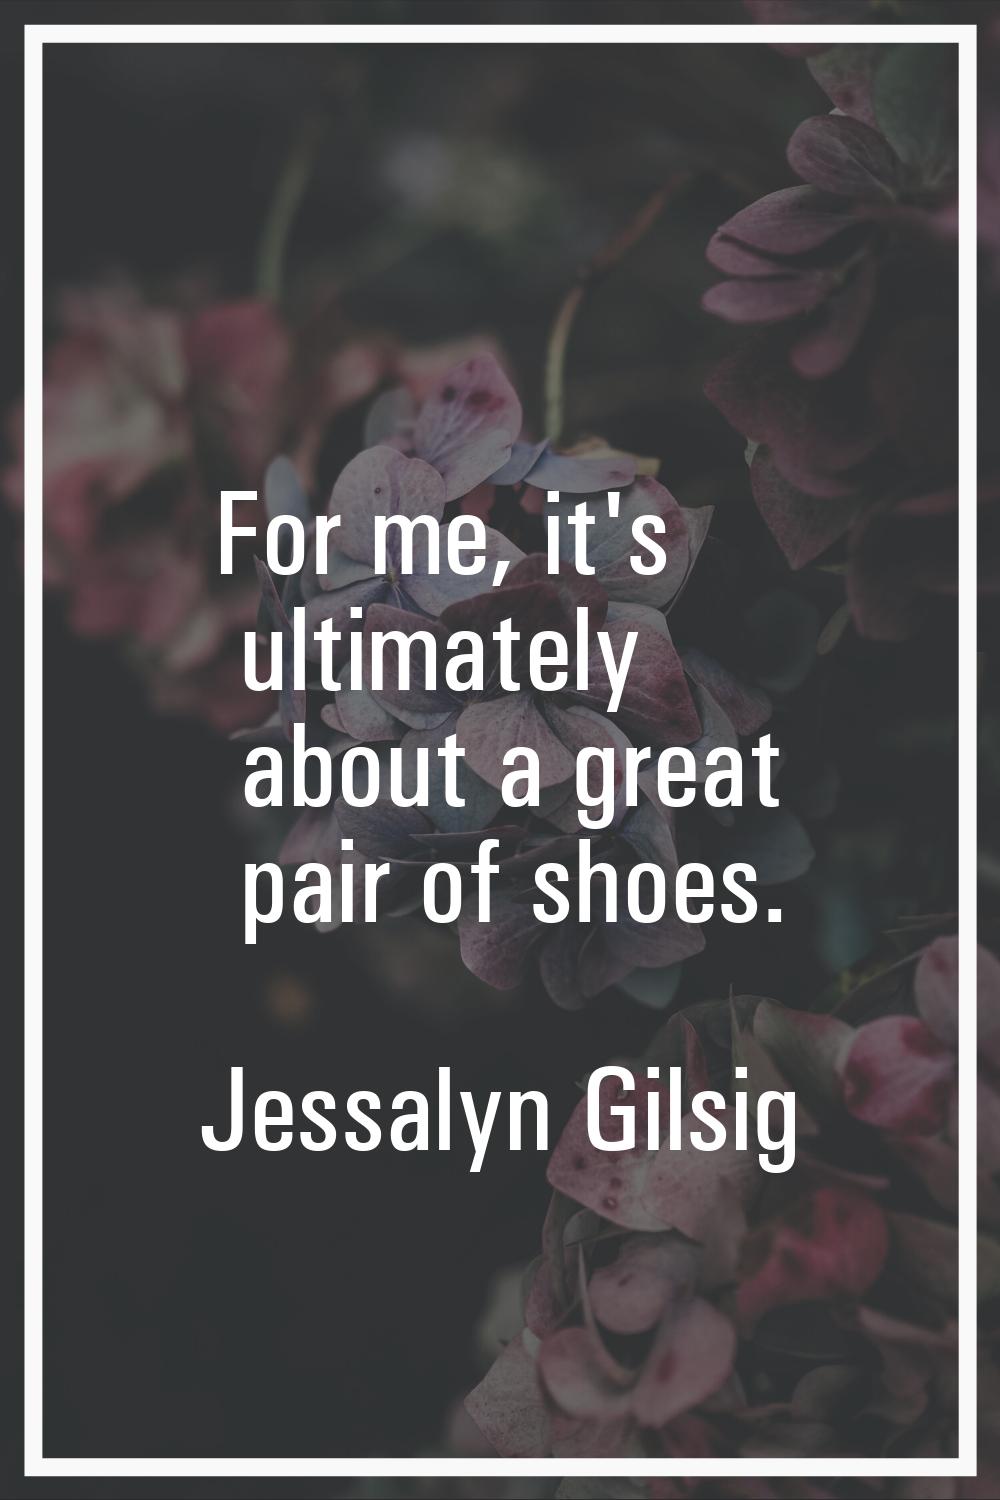 For me, it's ultimately about a great pair of shoes.